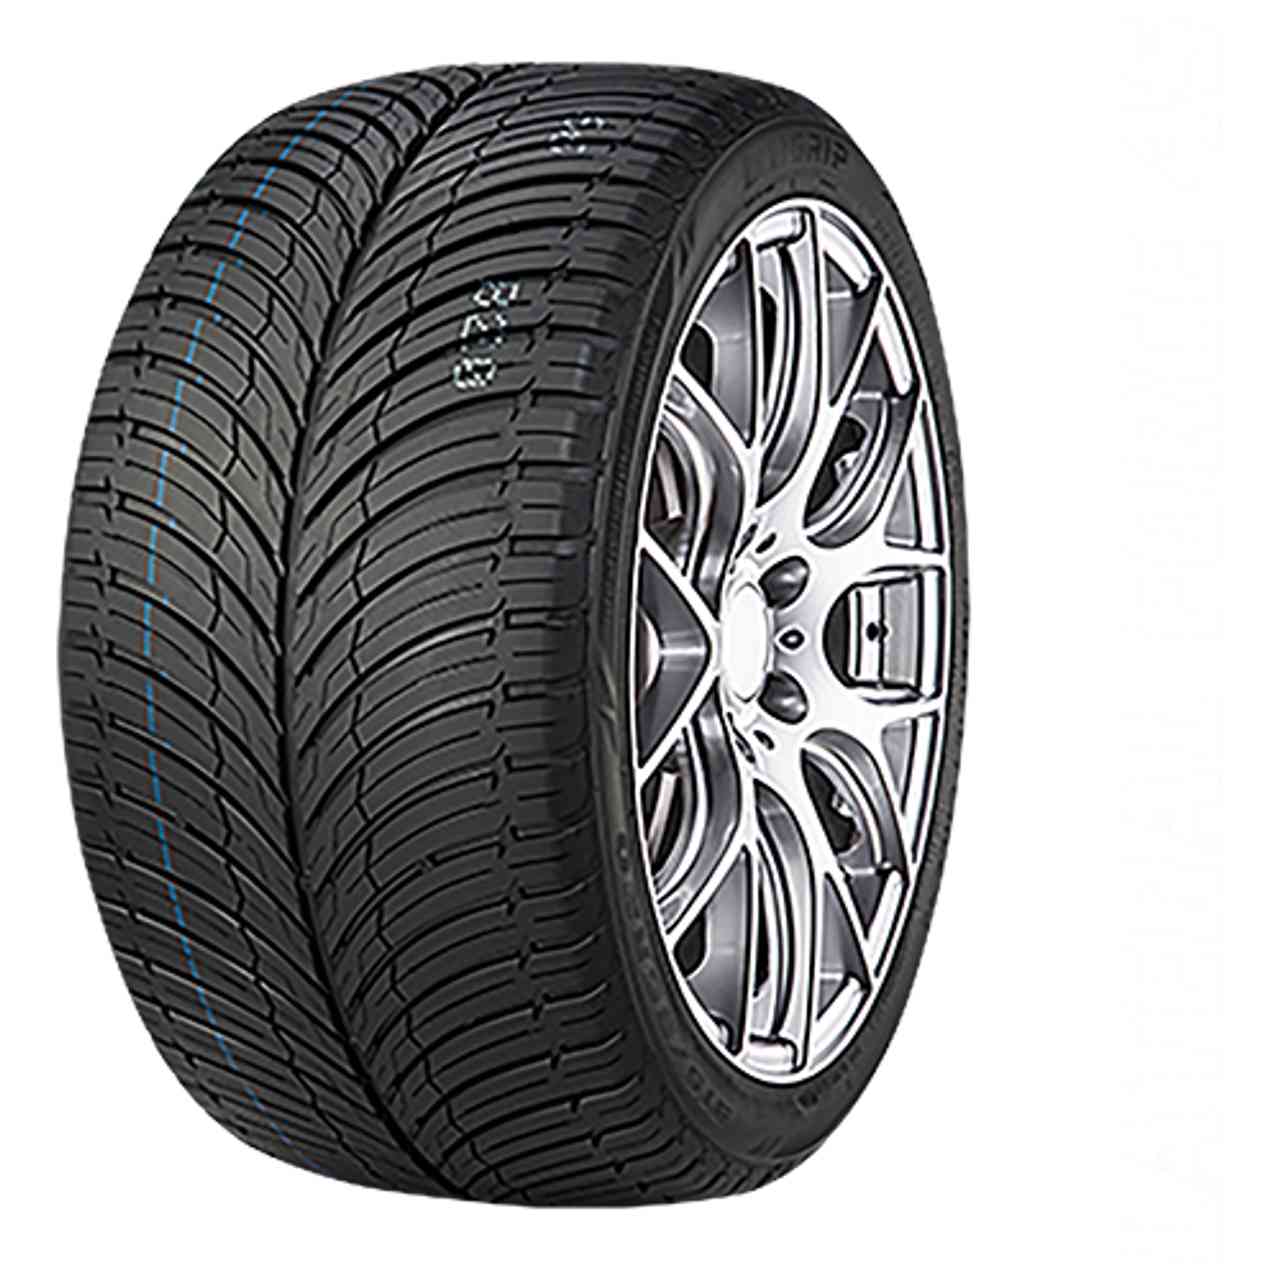 UNIGRIP LATERAL FORCE 4S 235/55ZR17 103W BSW